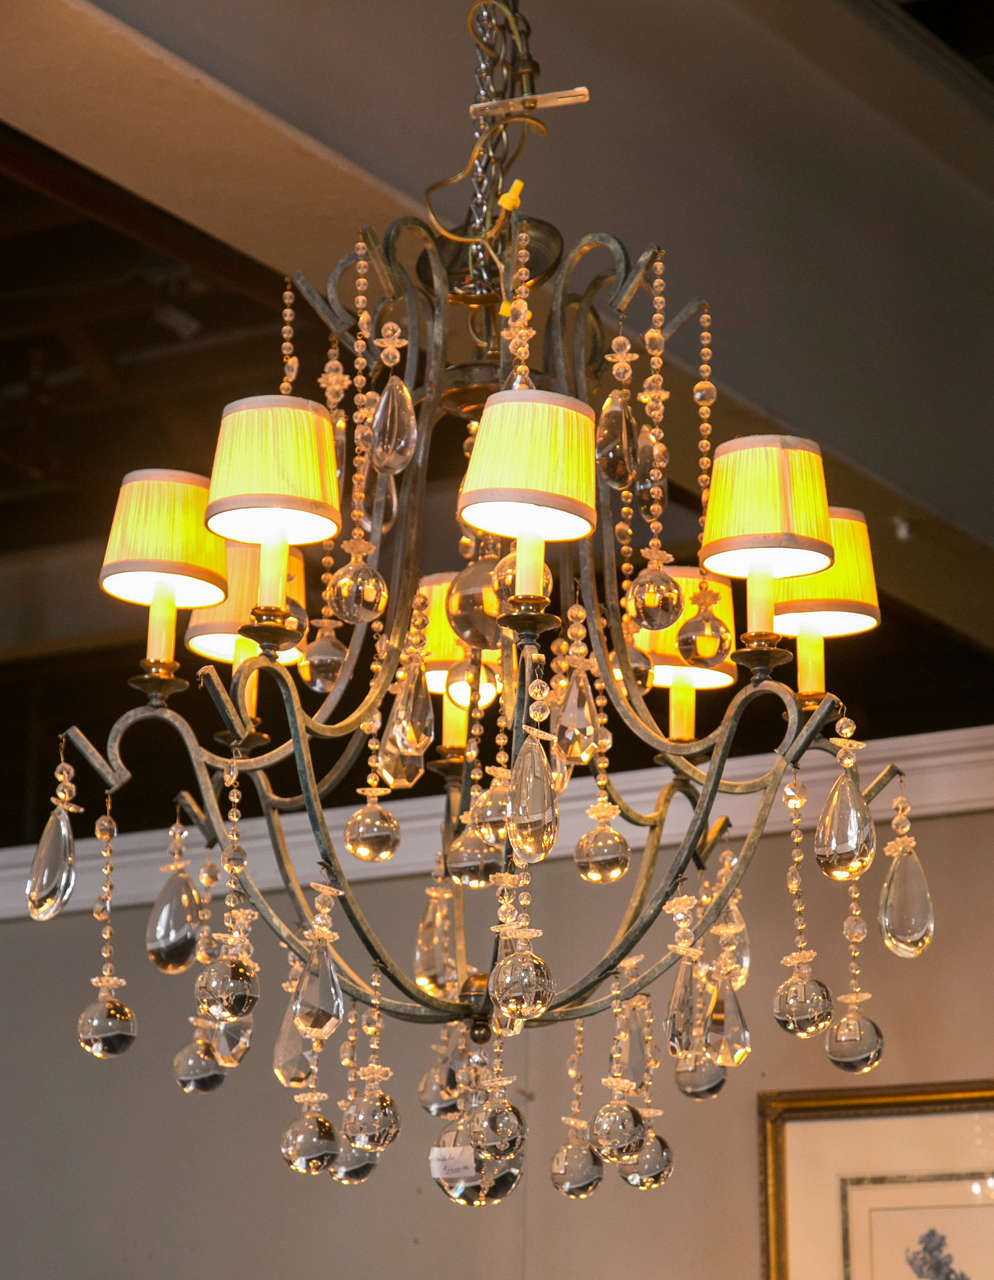 A fine Provincial style gilt and iron eight-arm chandelier. Having an elegant flow of open airiness this lighting fixture is surrounded by the elegance of crystal prisms which add warmth and charm to a variety of decor styles. Custom quality.